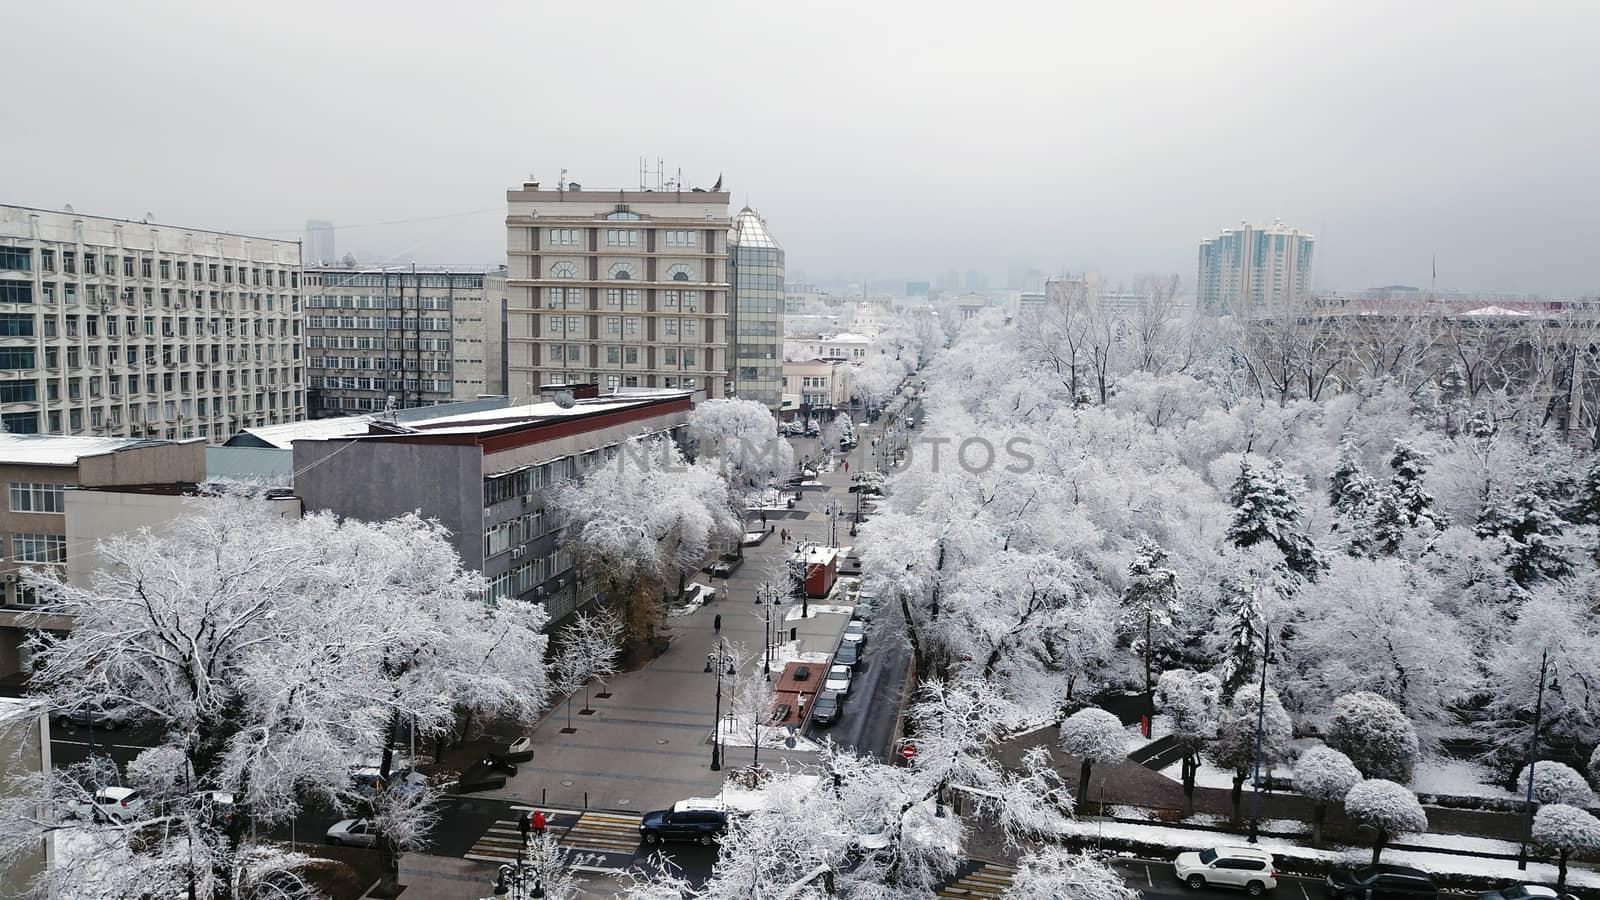 Trees covered with snow, urban environment. Street for walking, people go about their business, cars pass on the road, children ride on a swing. Snow-white trees, Christmas mood. Almaty, Kazakhstan.